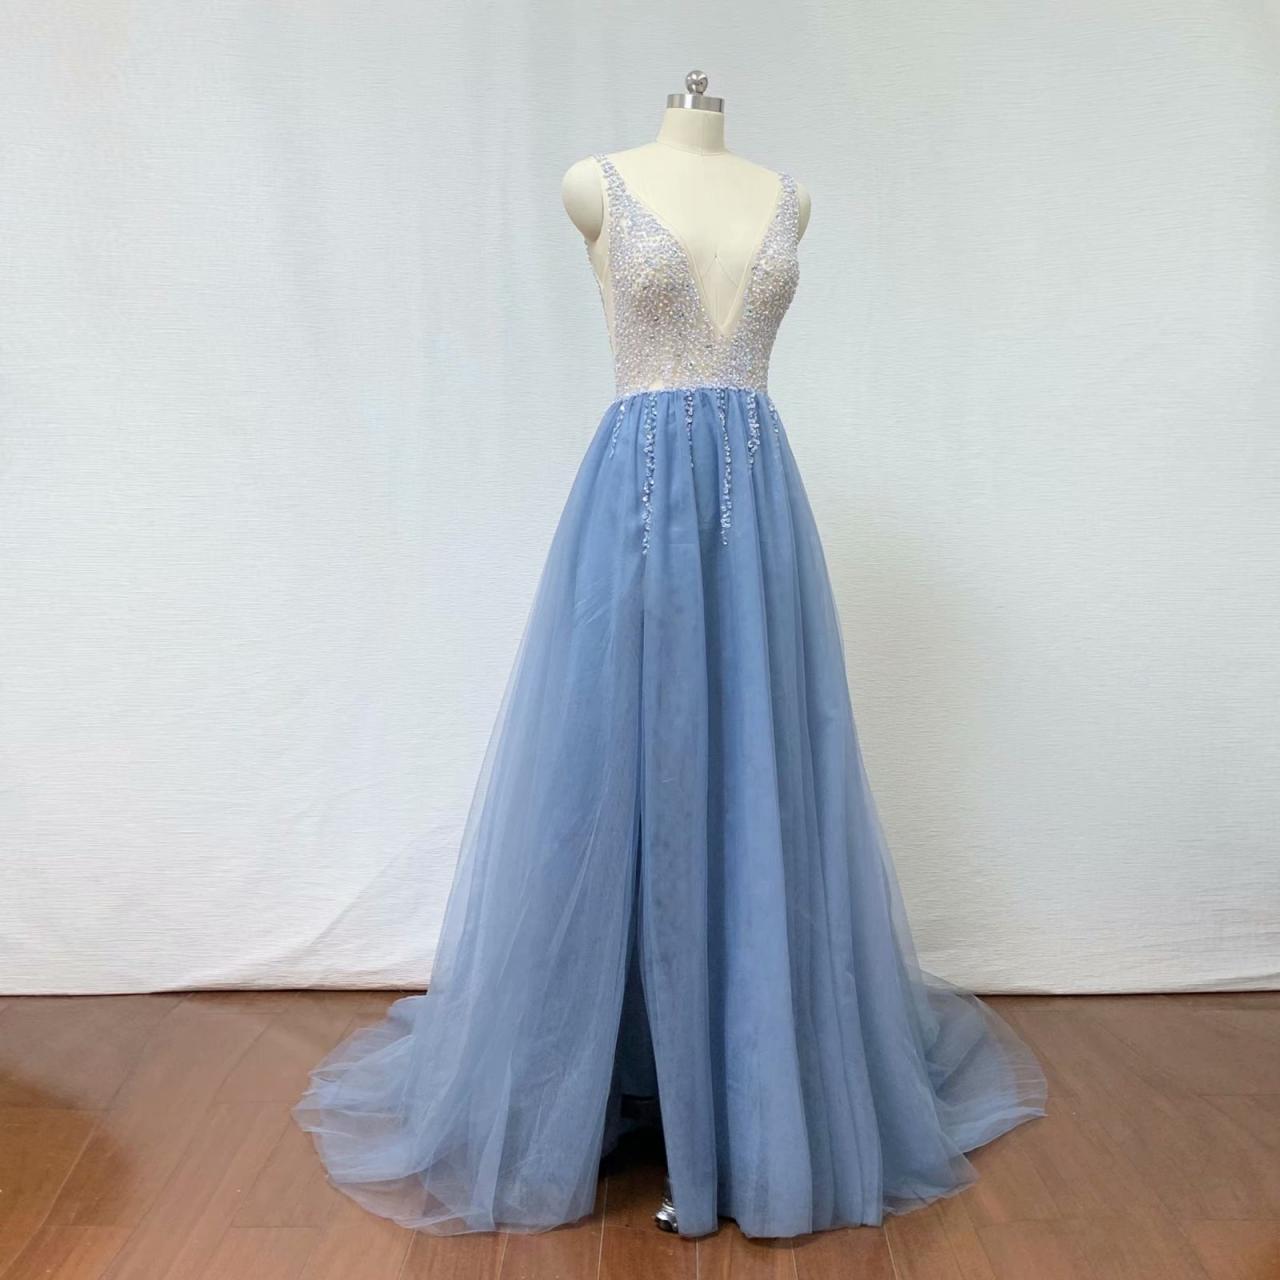 2019 Fashion Light Blue Beading Evening Dresses A Line Tulle Prom Gowns